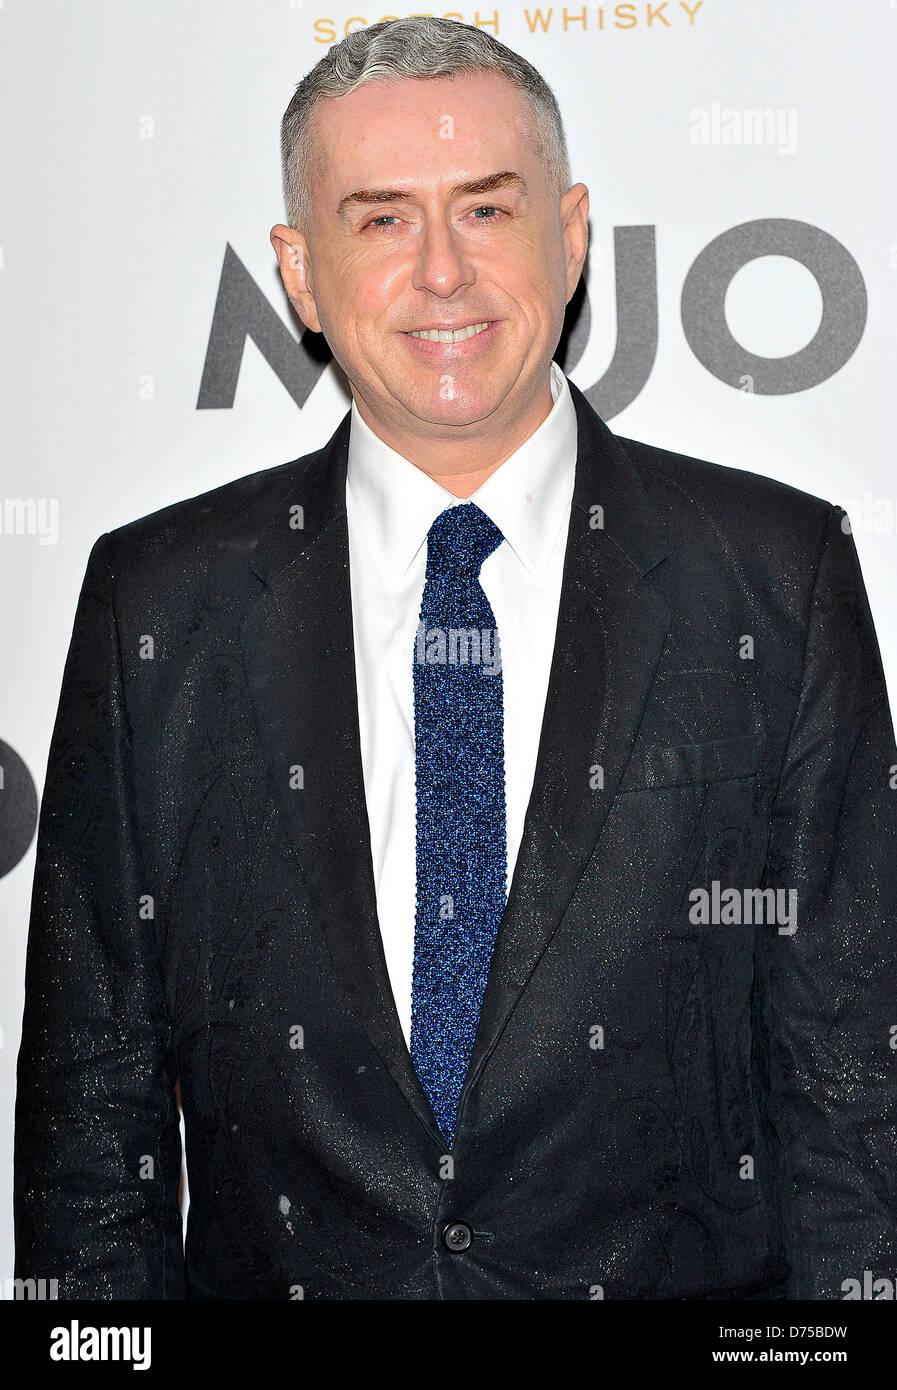 Holly Johnson Glenfiddich Mojo Honours List 2011 Awards Ceremony, held at The Brewery - Arrivals London, England - 21.07.11 Stock Photo